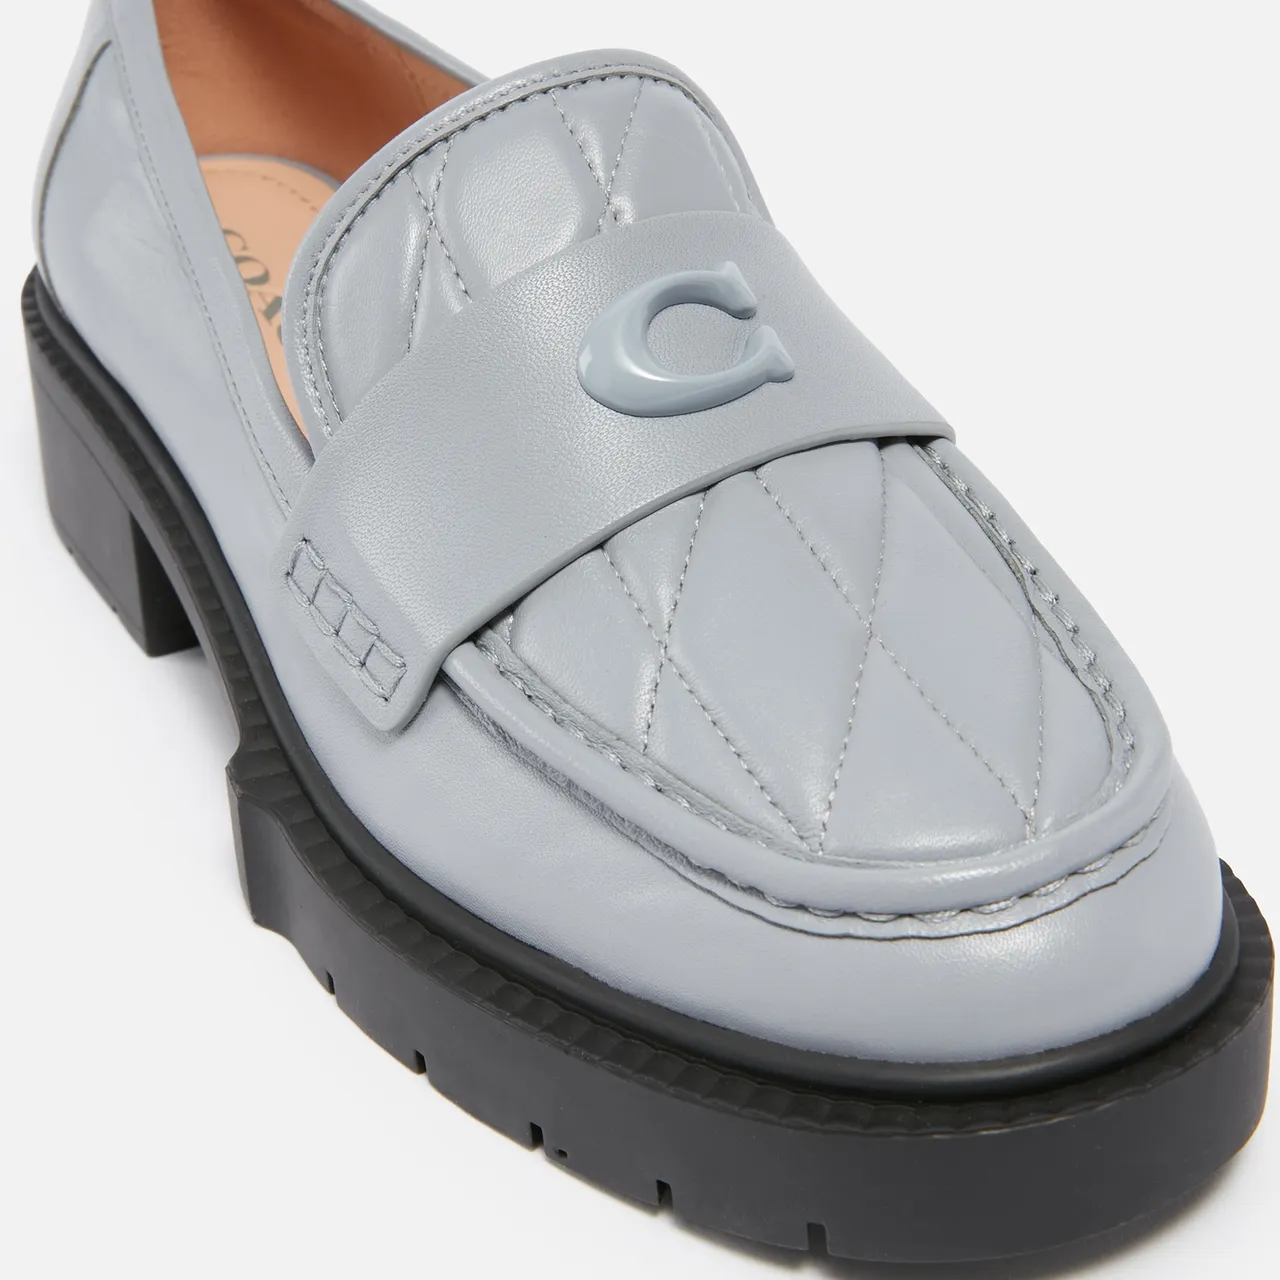 Coach Women's Leah Quilted Leather Loafers - UK